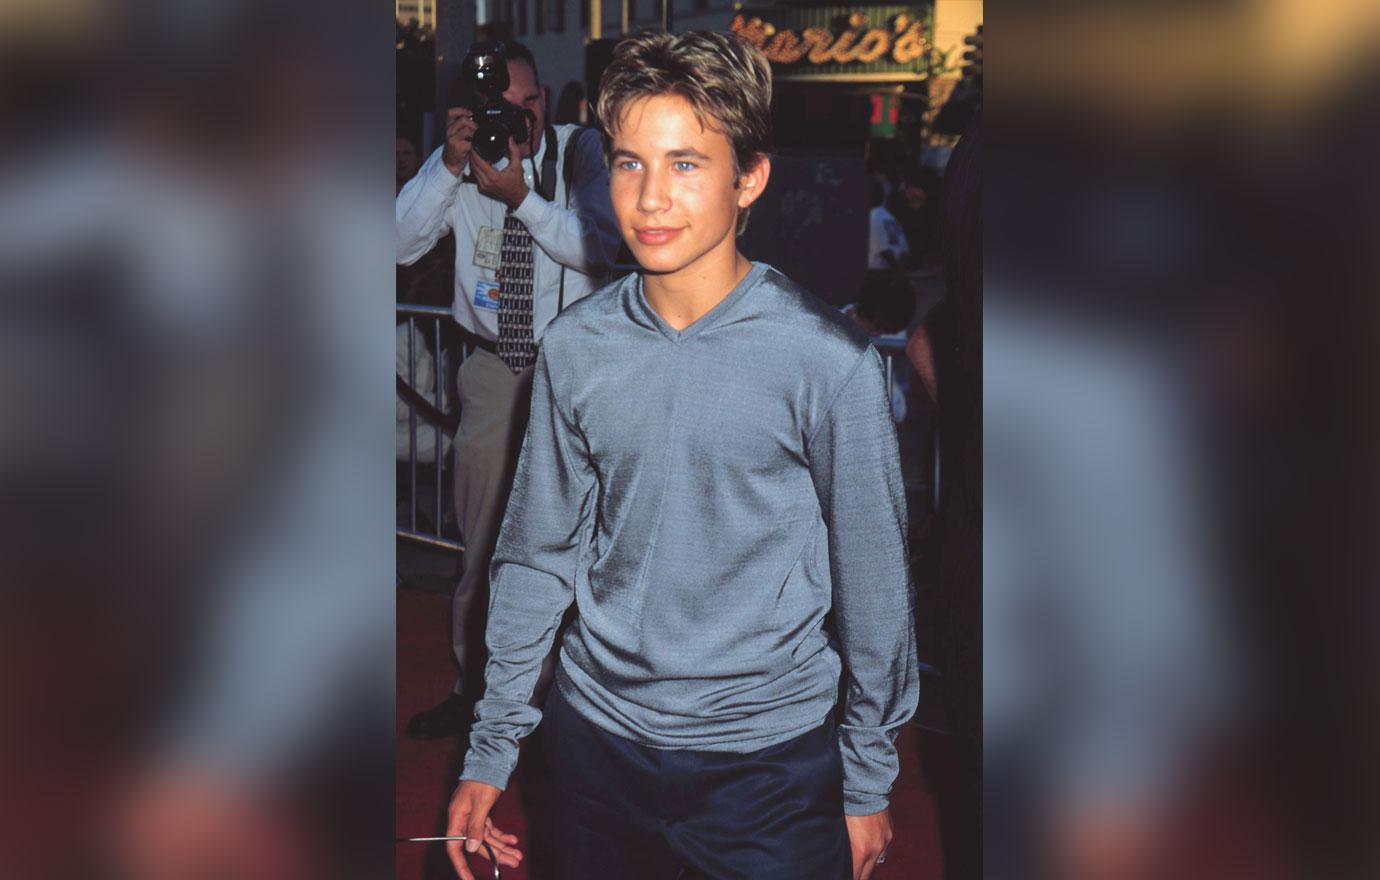 Jonathan taylor thomas looks unrecognizable in first public sighting in years